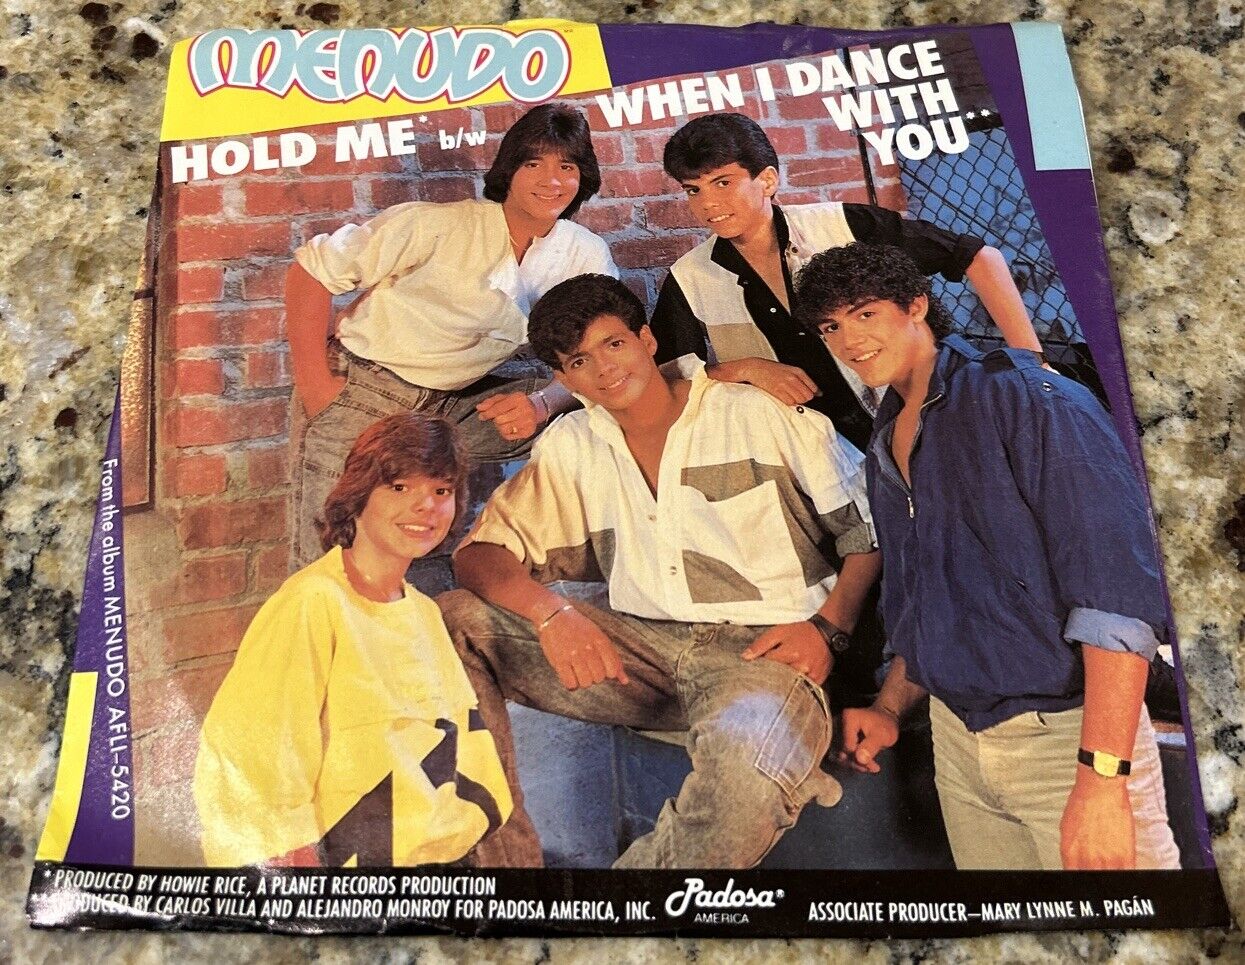 MENUDO- HOLD ME/WHEN I DANCE WITH YOU 45RPM 7” RCA PB-14087 PICTURE SLEEVE